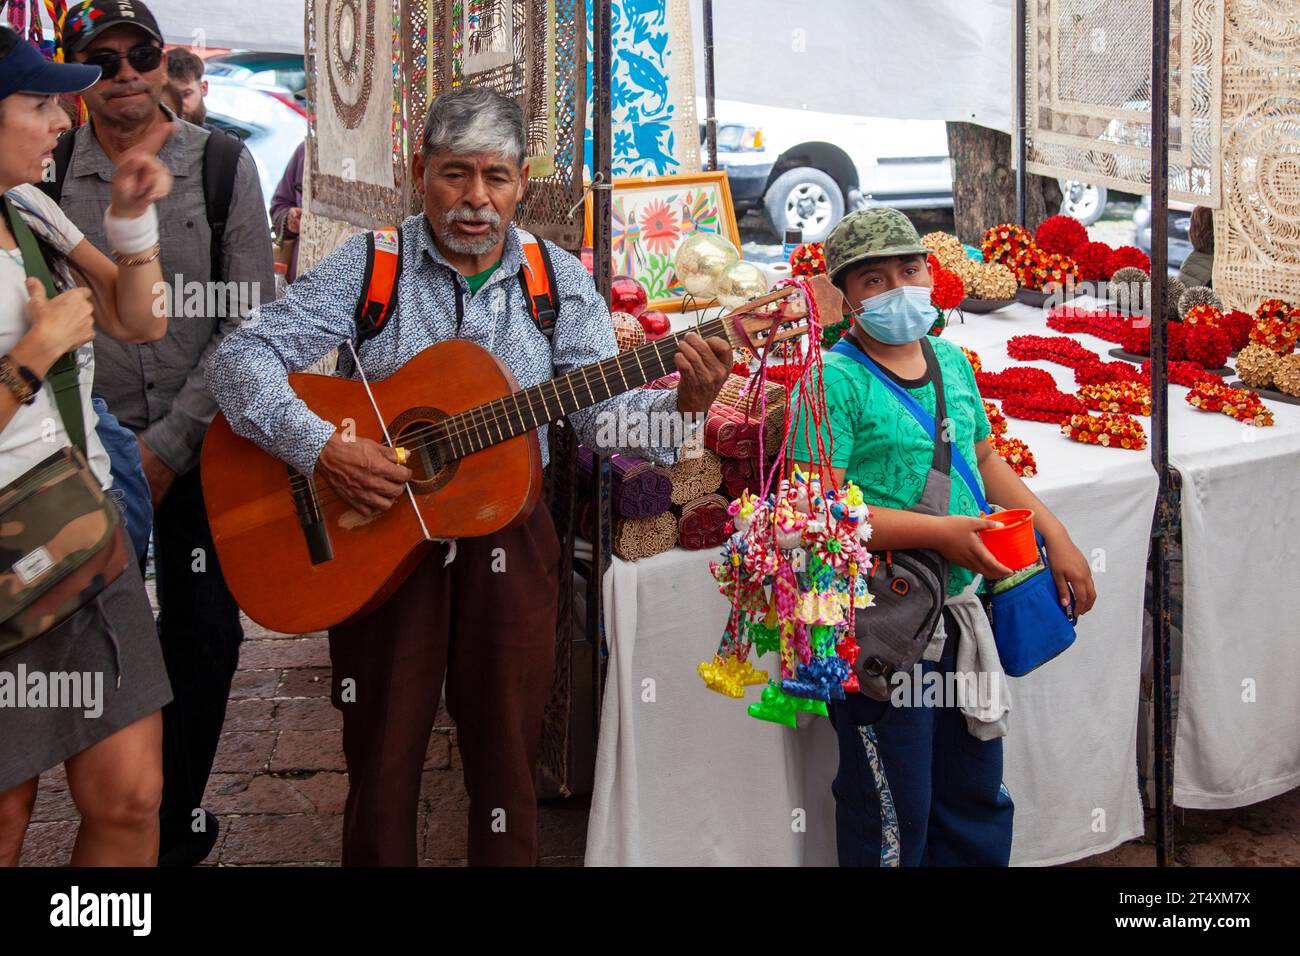 Man Playing Guitar for Donations at Craft Market on Plaza Tenanitla By San Jacinto Square and Bazar Sabado on Art Saturdays in Mexico City, Mexico Stock Photo